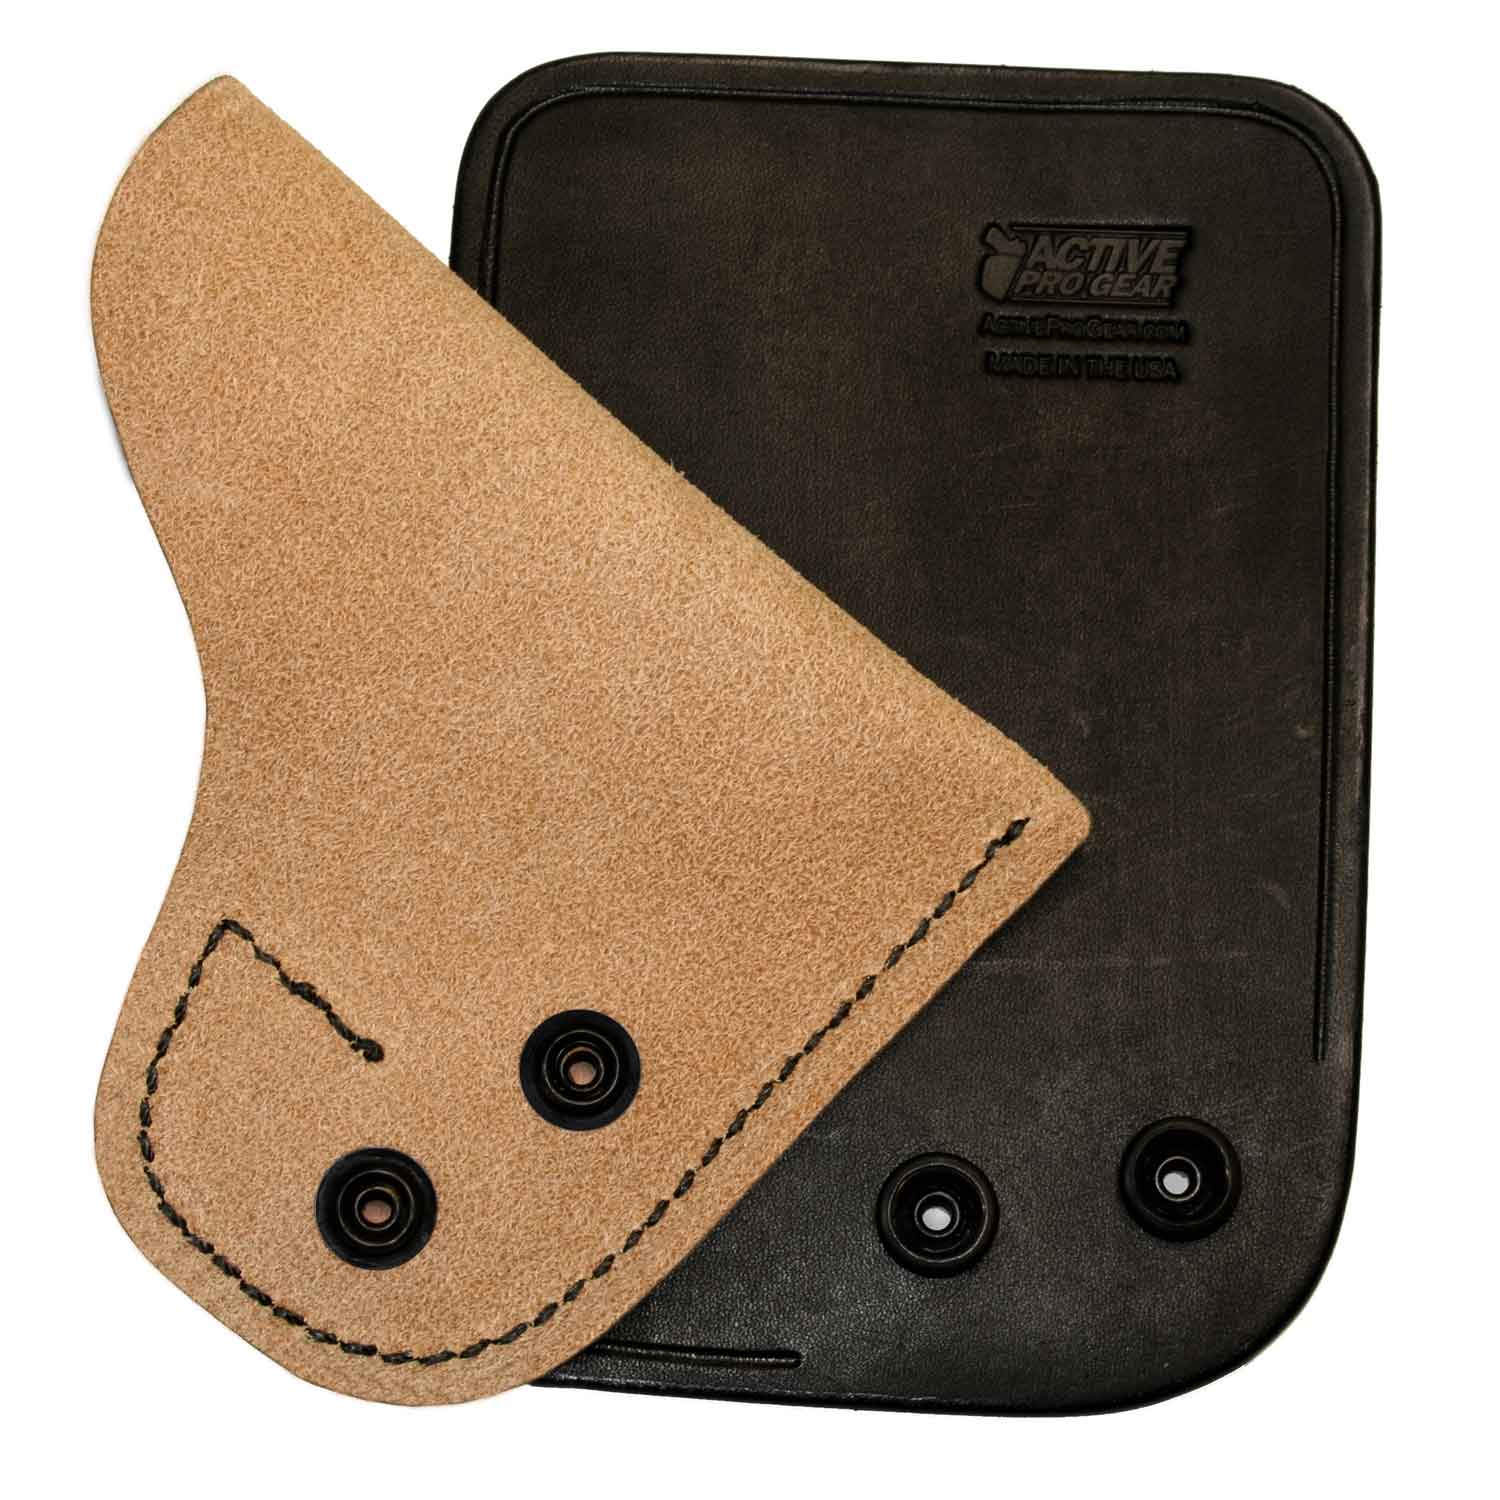 Leather Pocket Holster with Guard - Active Pro Gear